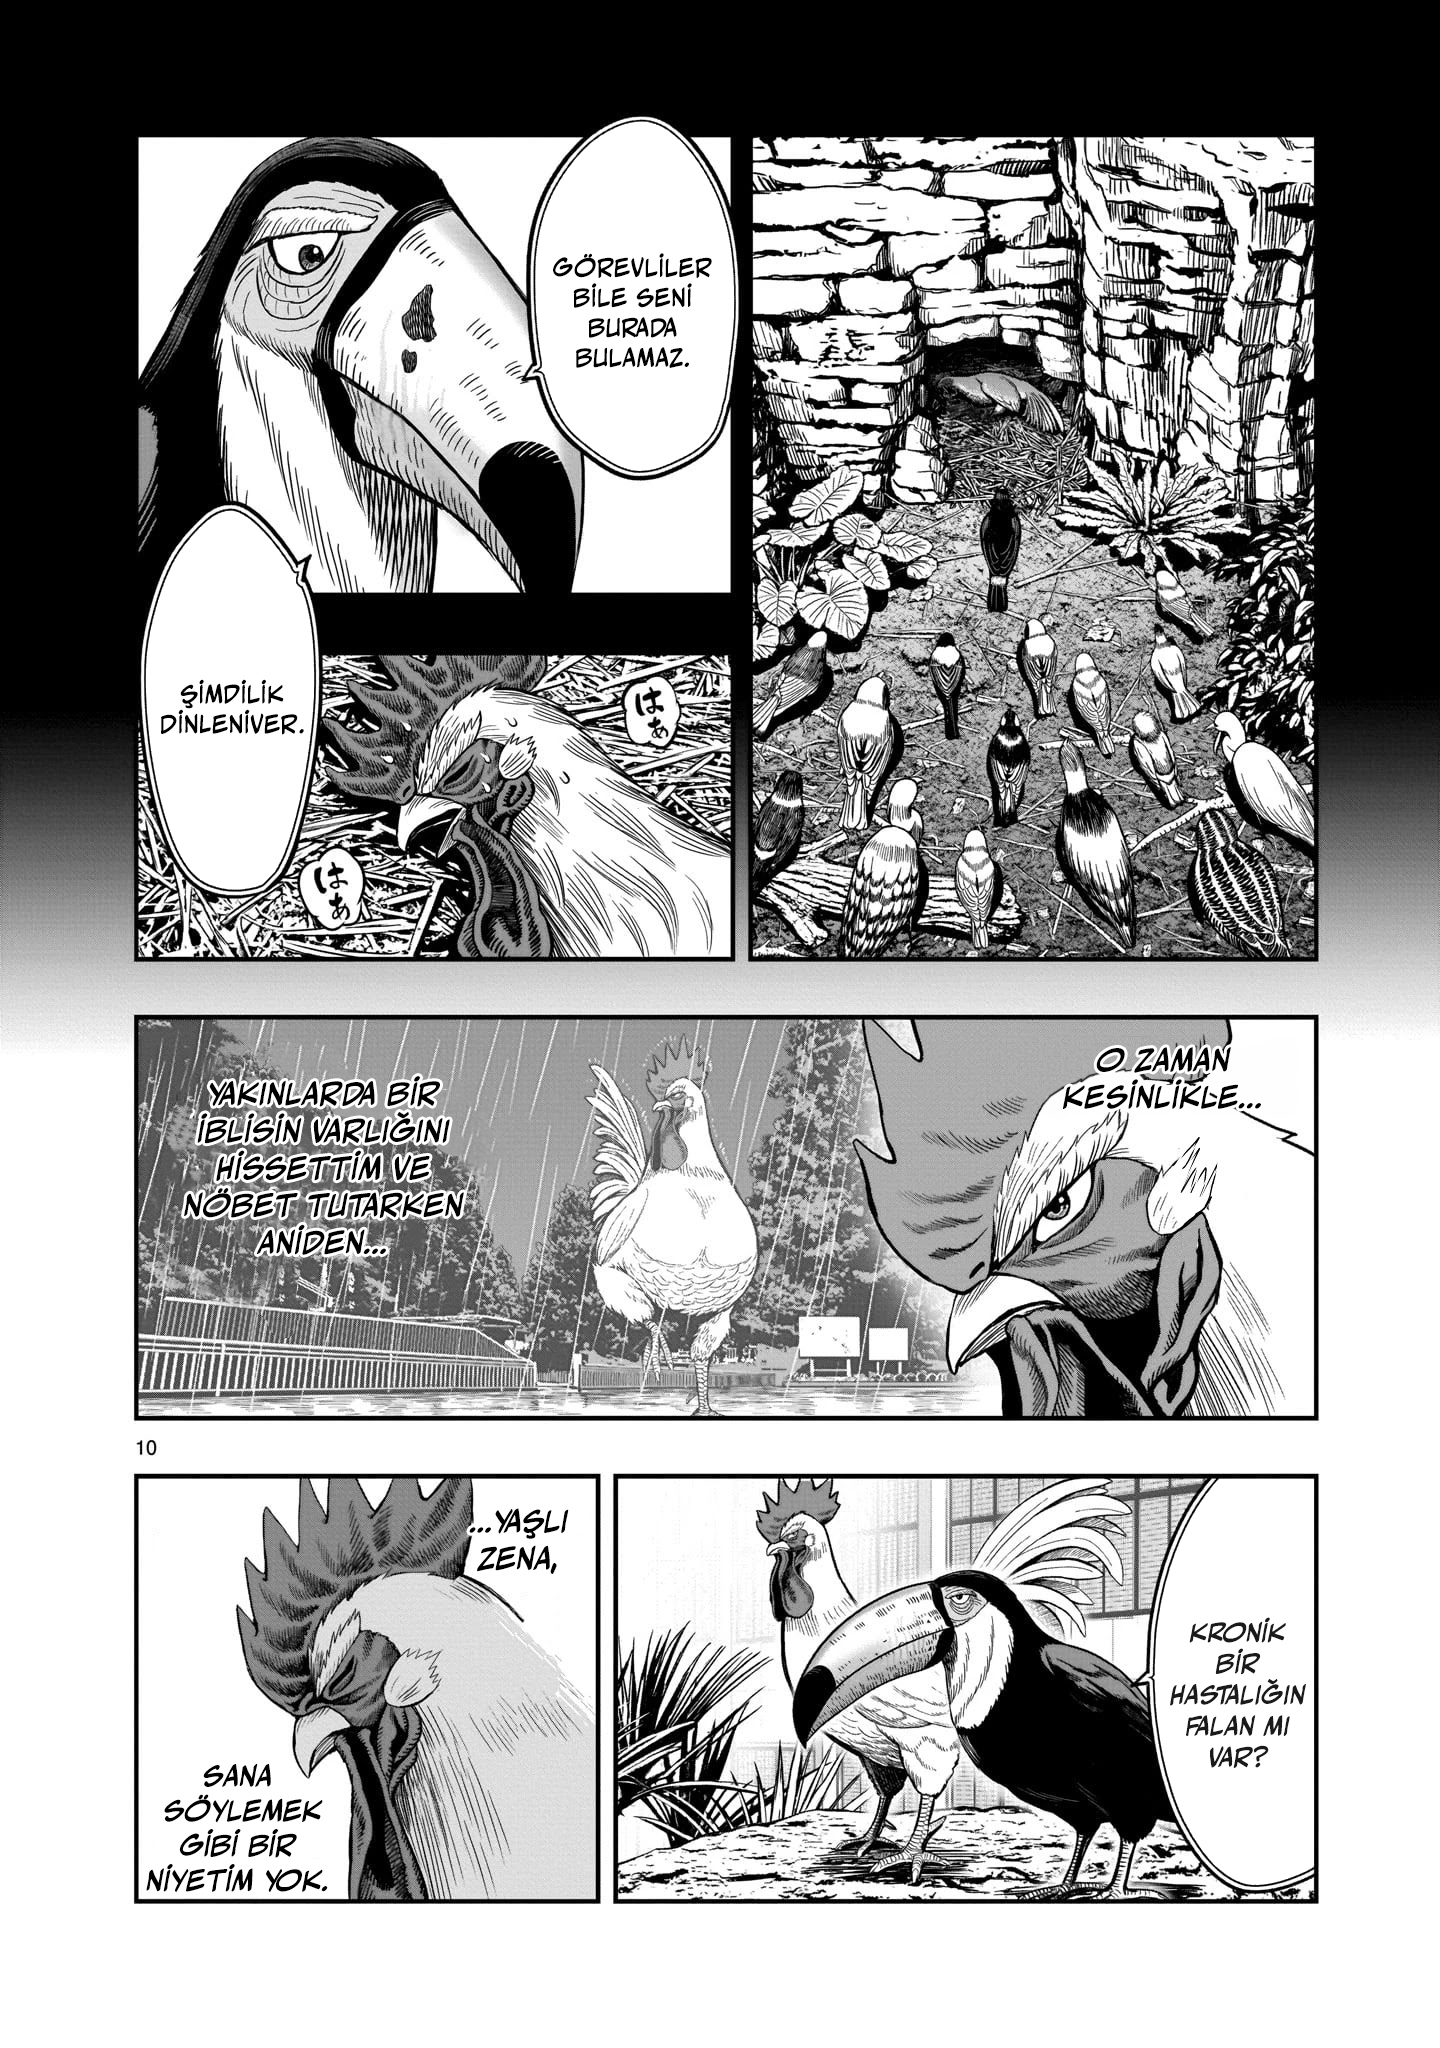 9781974736515_manga-rooster-fighter-volume-3-primary.jpg?sw=300&sh=300&sm=fit